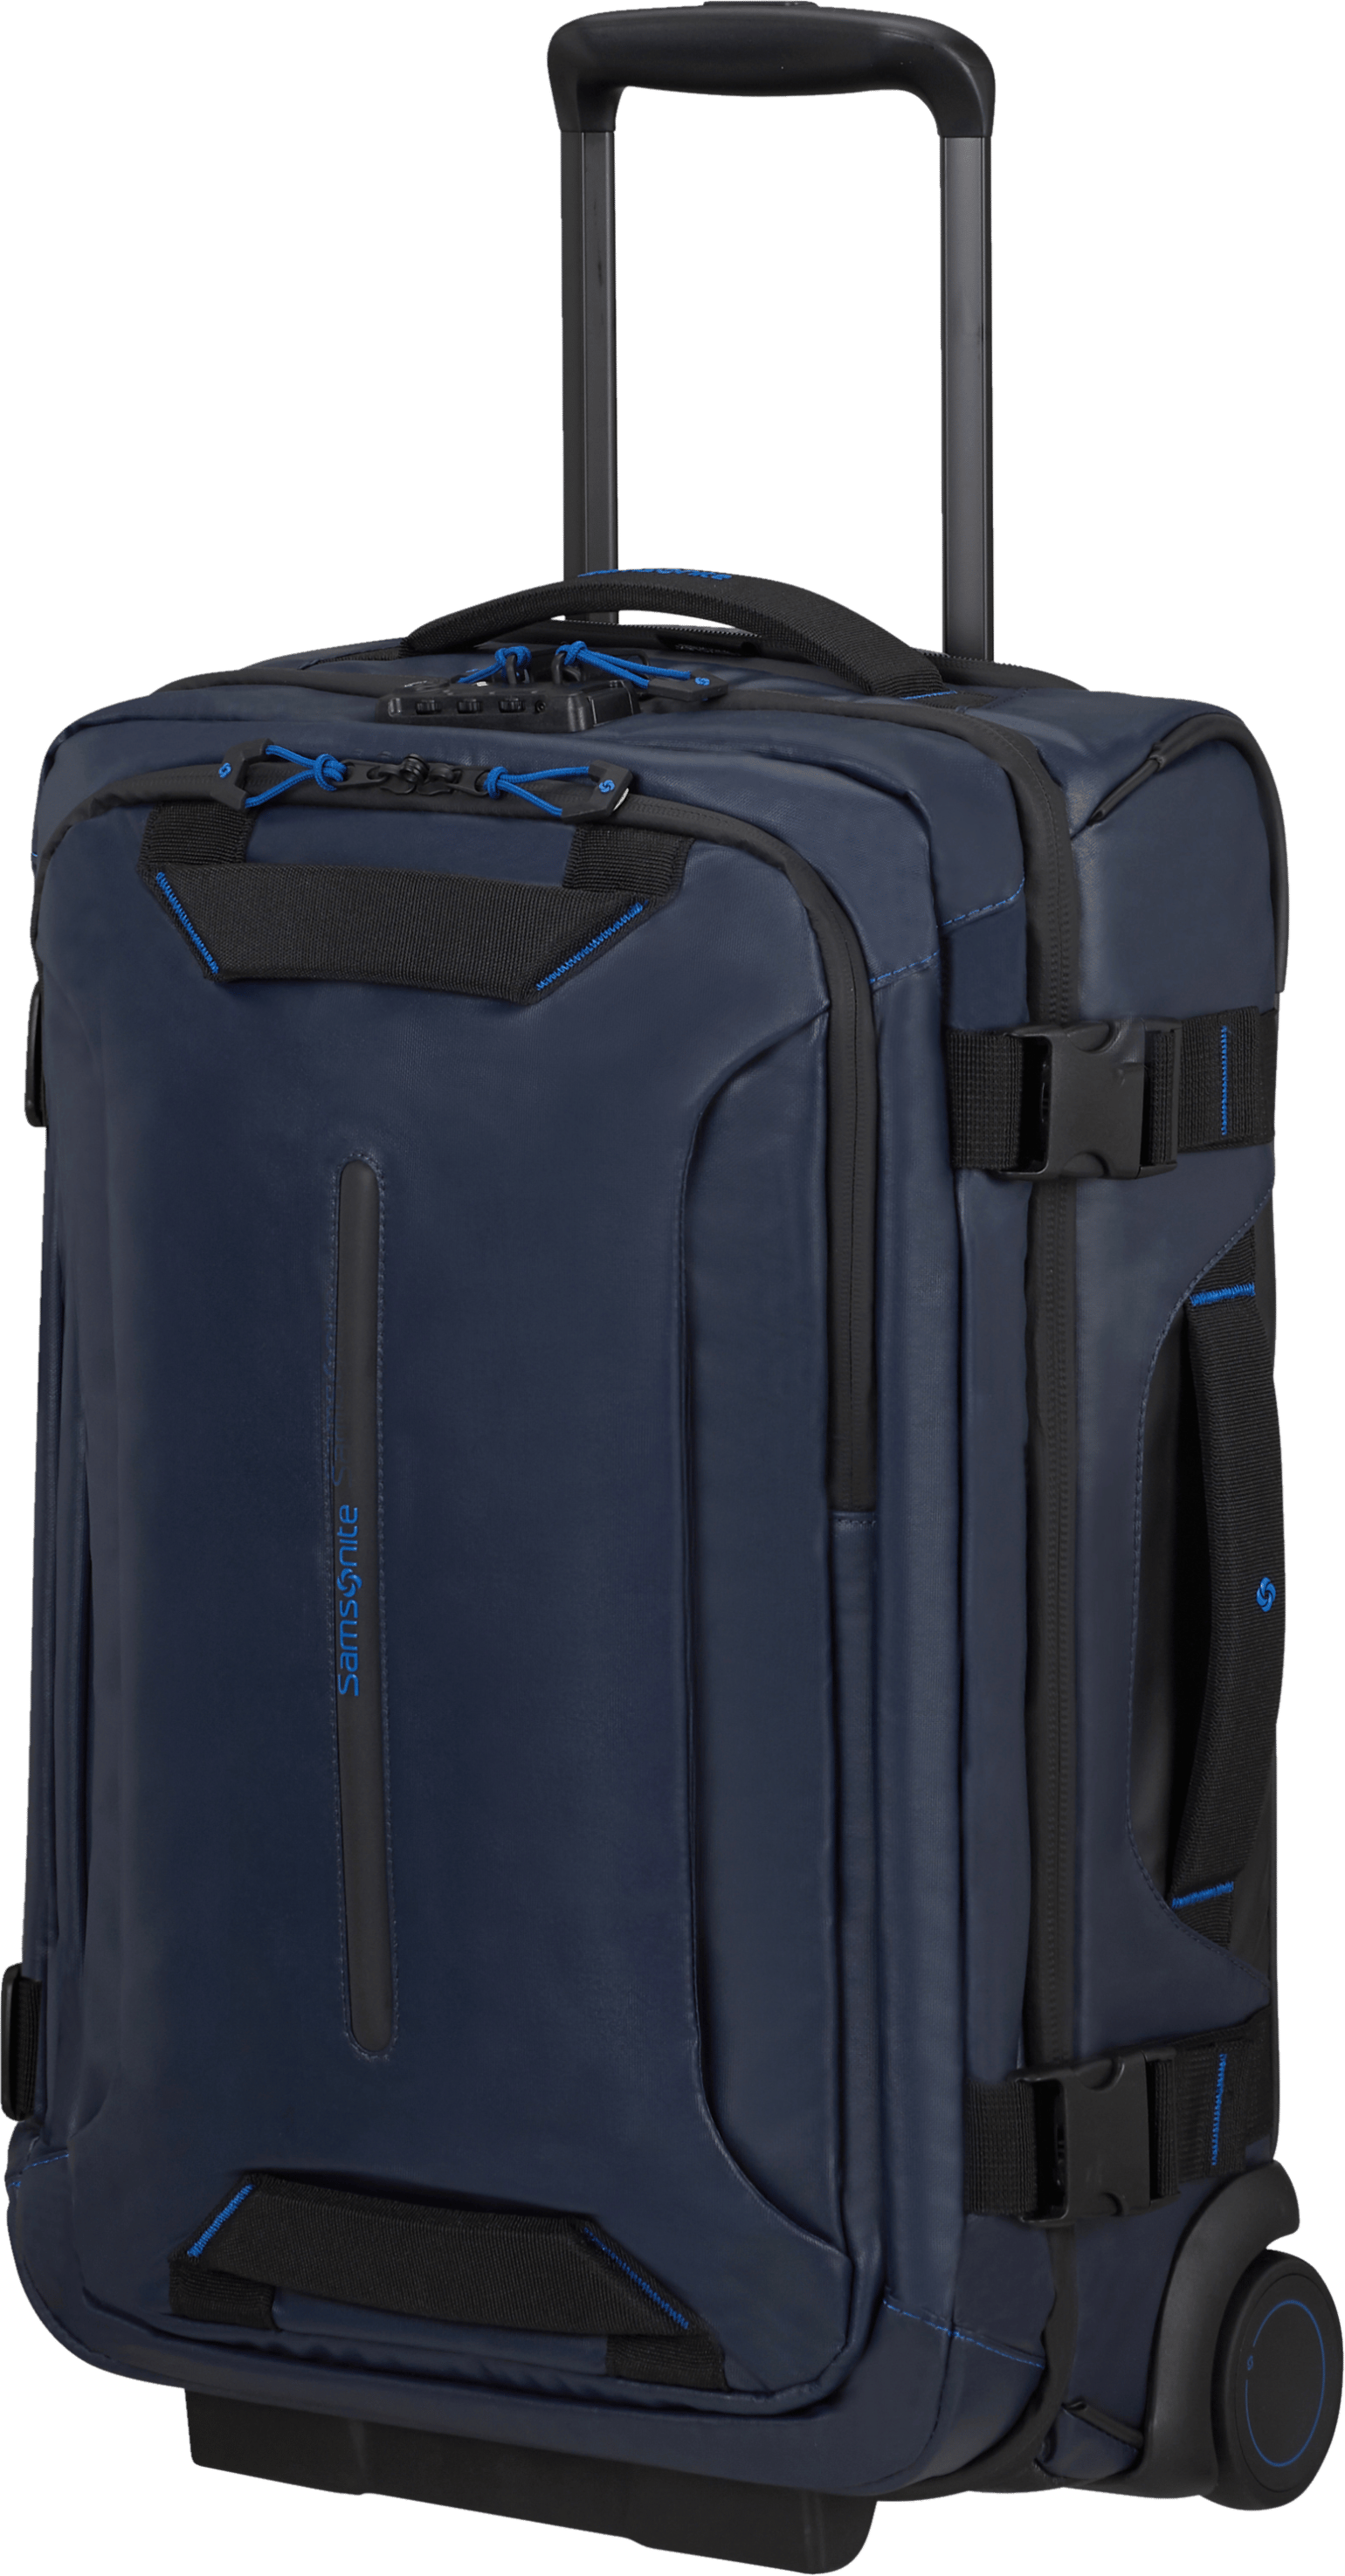 Samsonite Ecodiver Duffle with wheels double frame 55cm Blue Nights